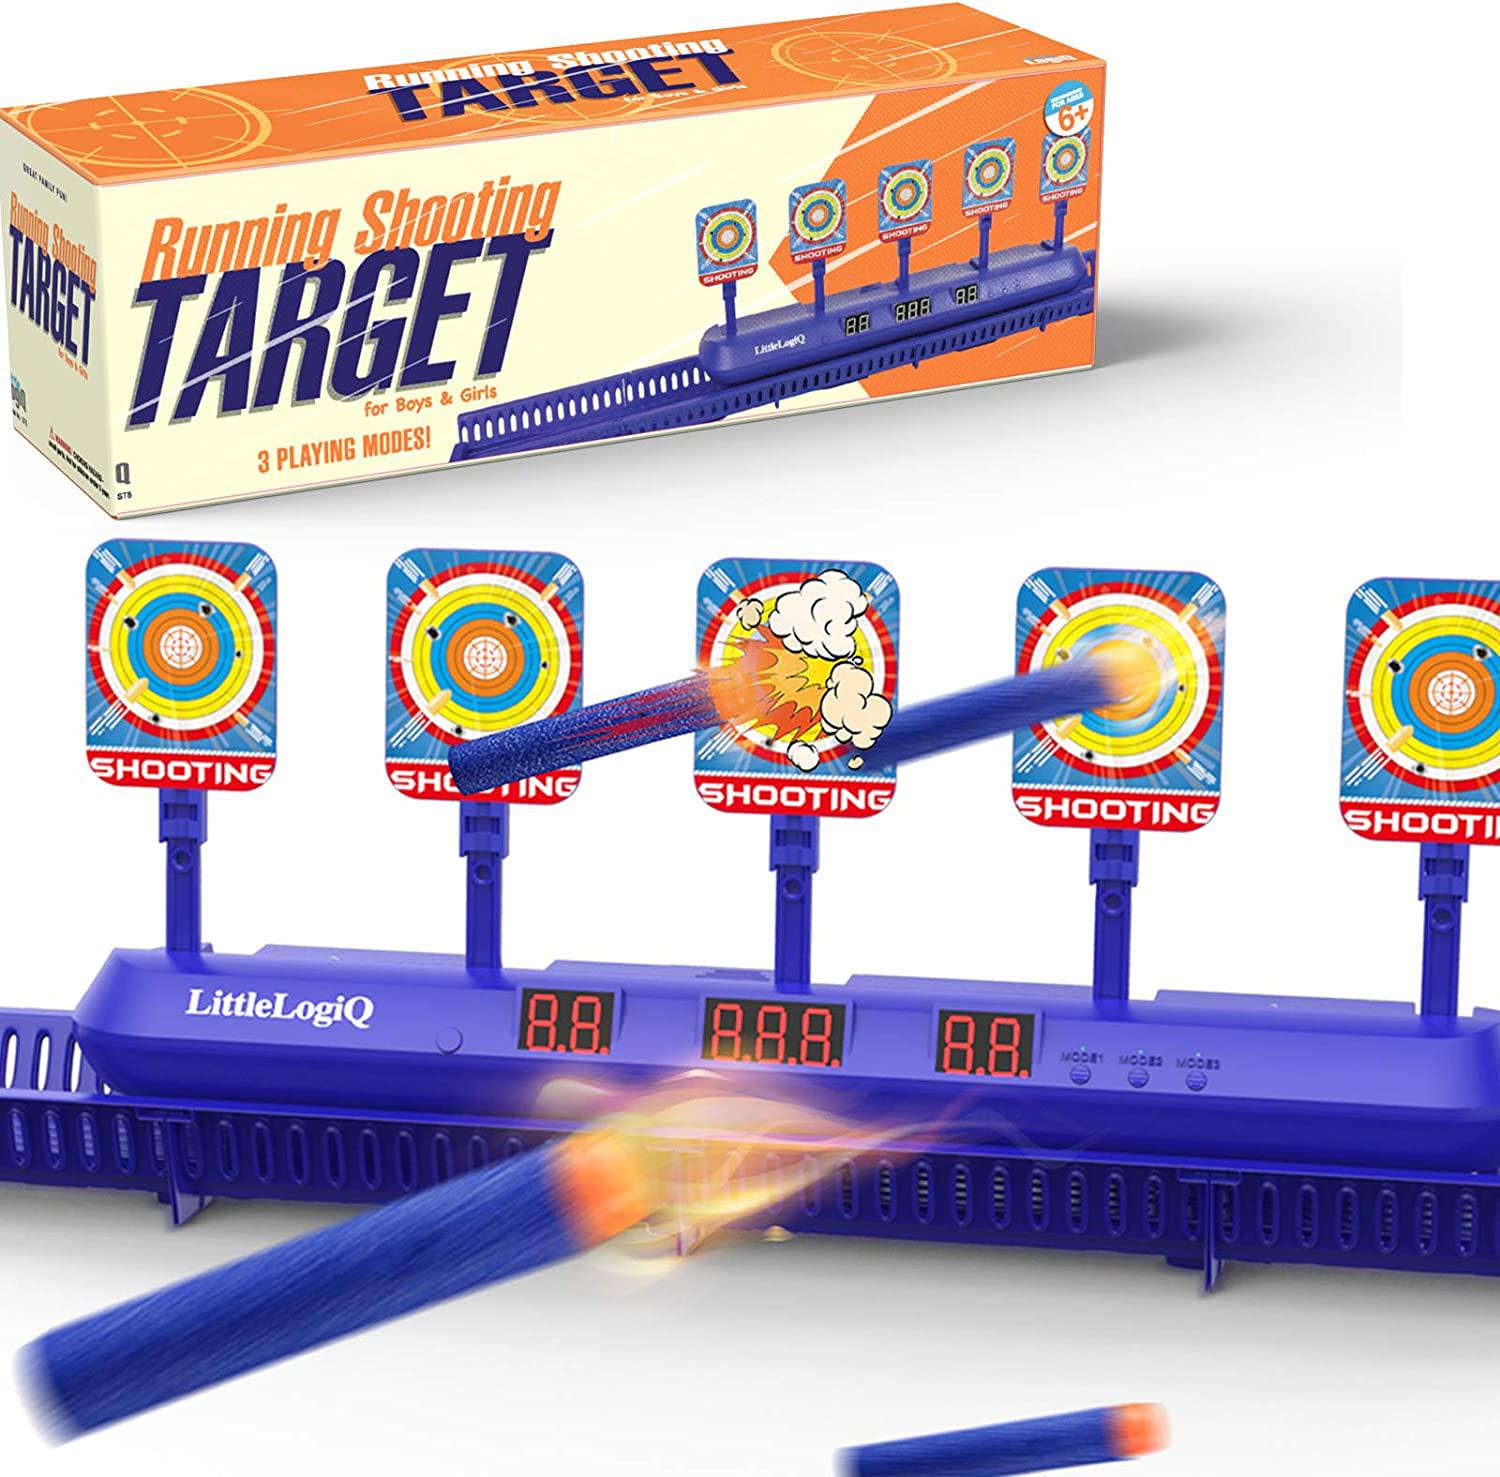 LITTLELOGIQ, Electronic Shooting Target, LITTLELOGIQ Shooting Games for Kids, Toy for Age 5, 6, 7, 8, 9+ Year Old Boys Girls, Scoring Auto Reset Target, Ideal Gift Set, Compatible with Nerf Foam Guns